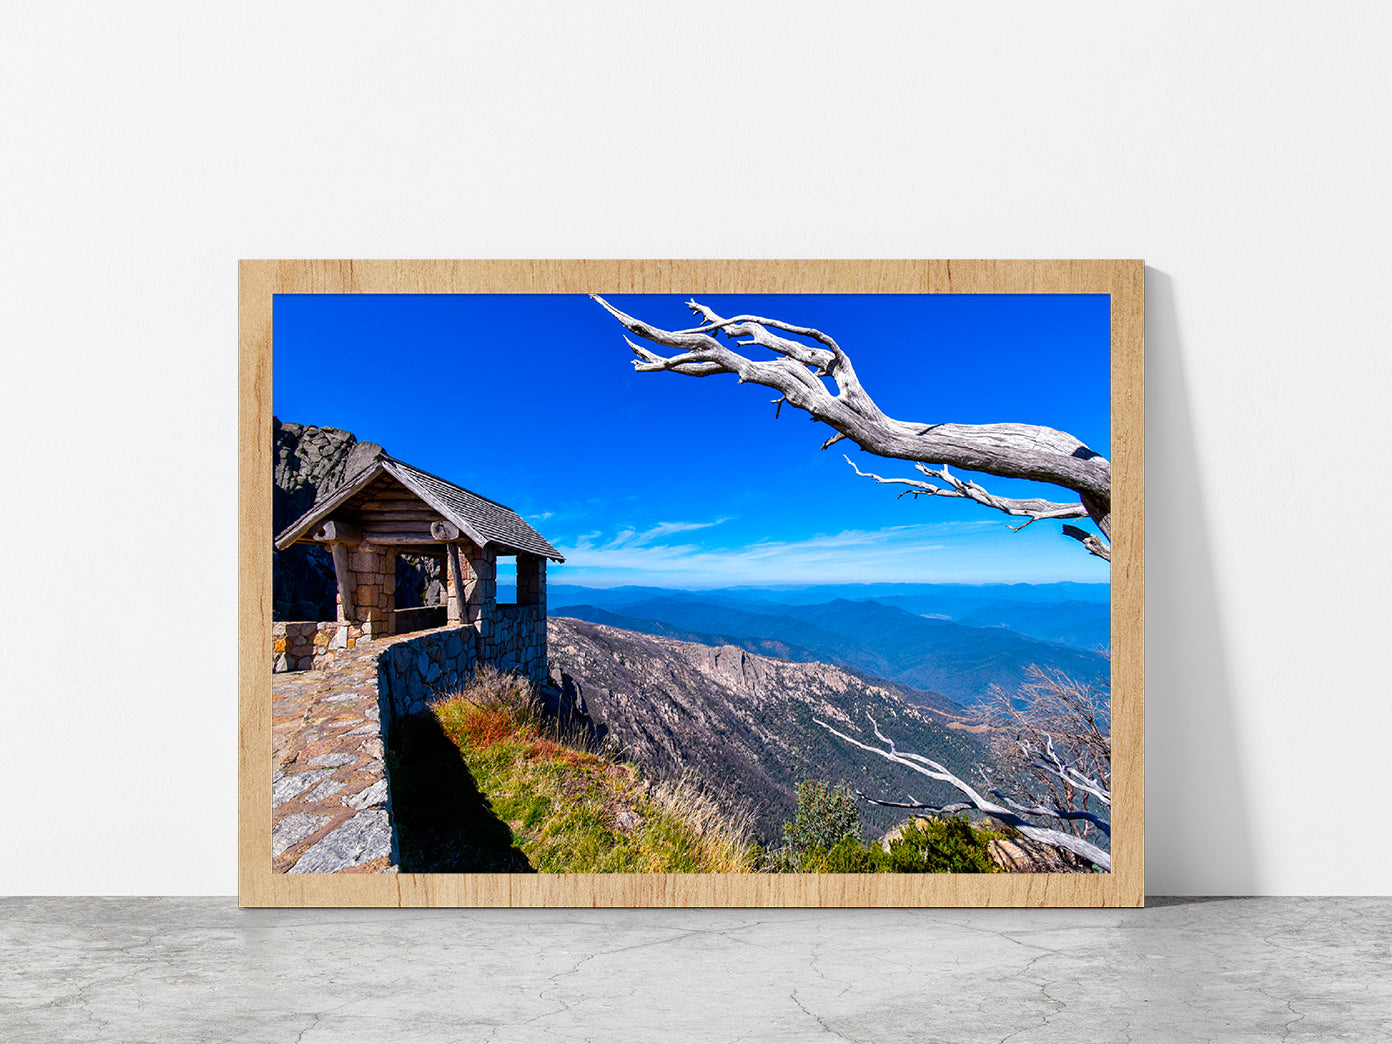 Hut On Top Of Mountain Blue Sky Glass Framed Wall Art, Ready to Hang Quality Print Without White Border Oak